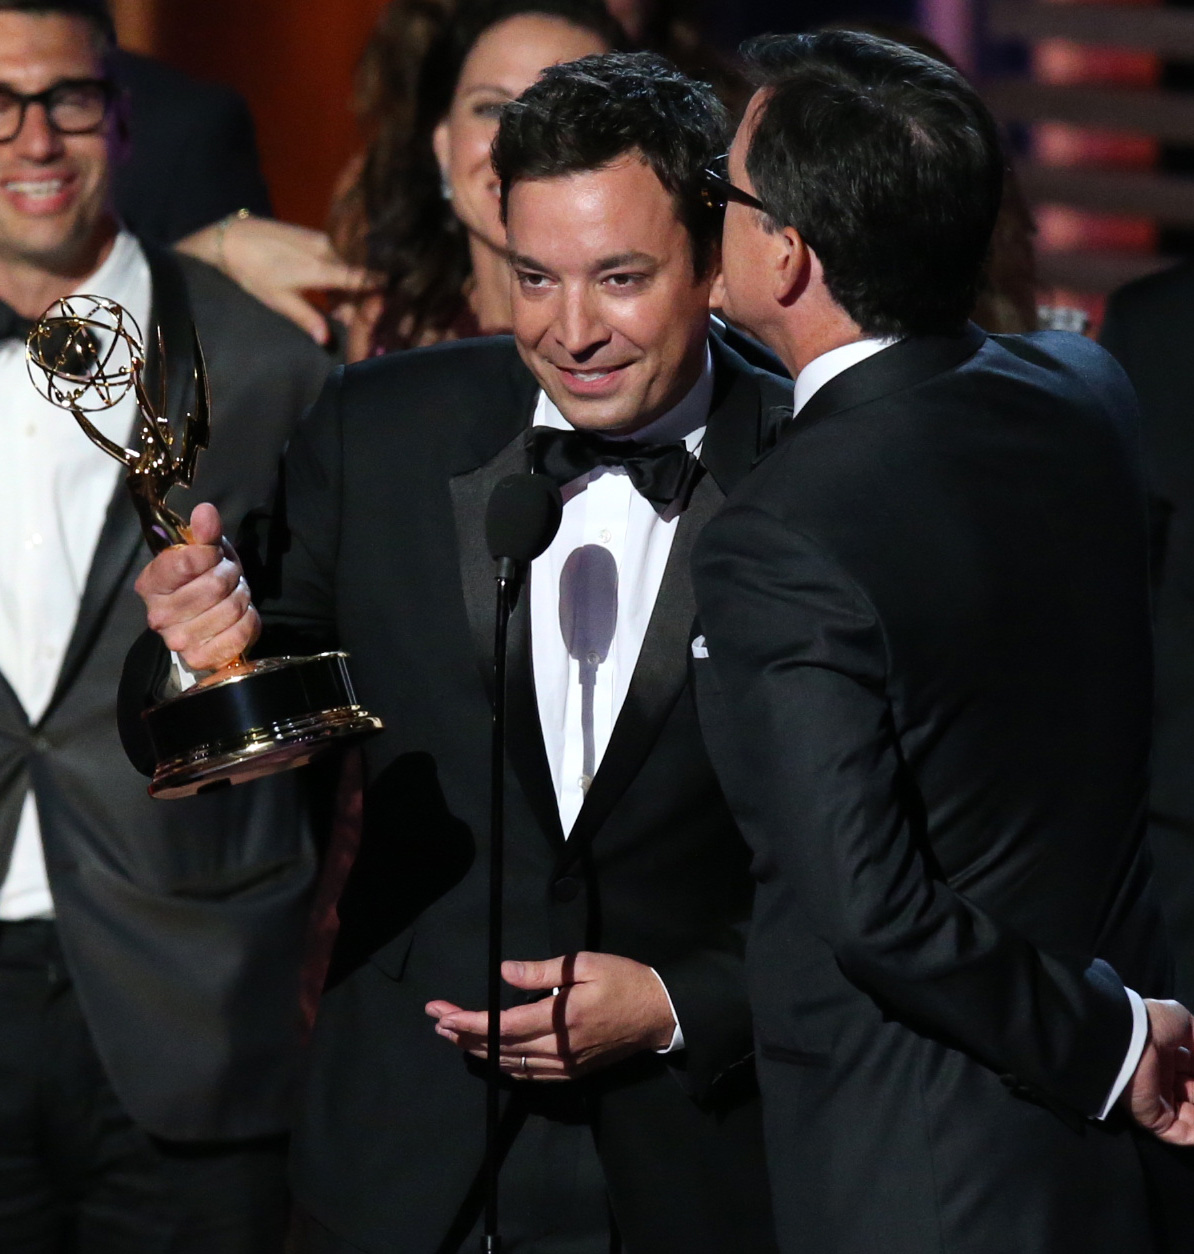 Stephen Colbert and Jimmy Fallon at event of The 66th Primetime Emmy Awards (2014)